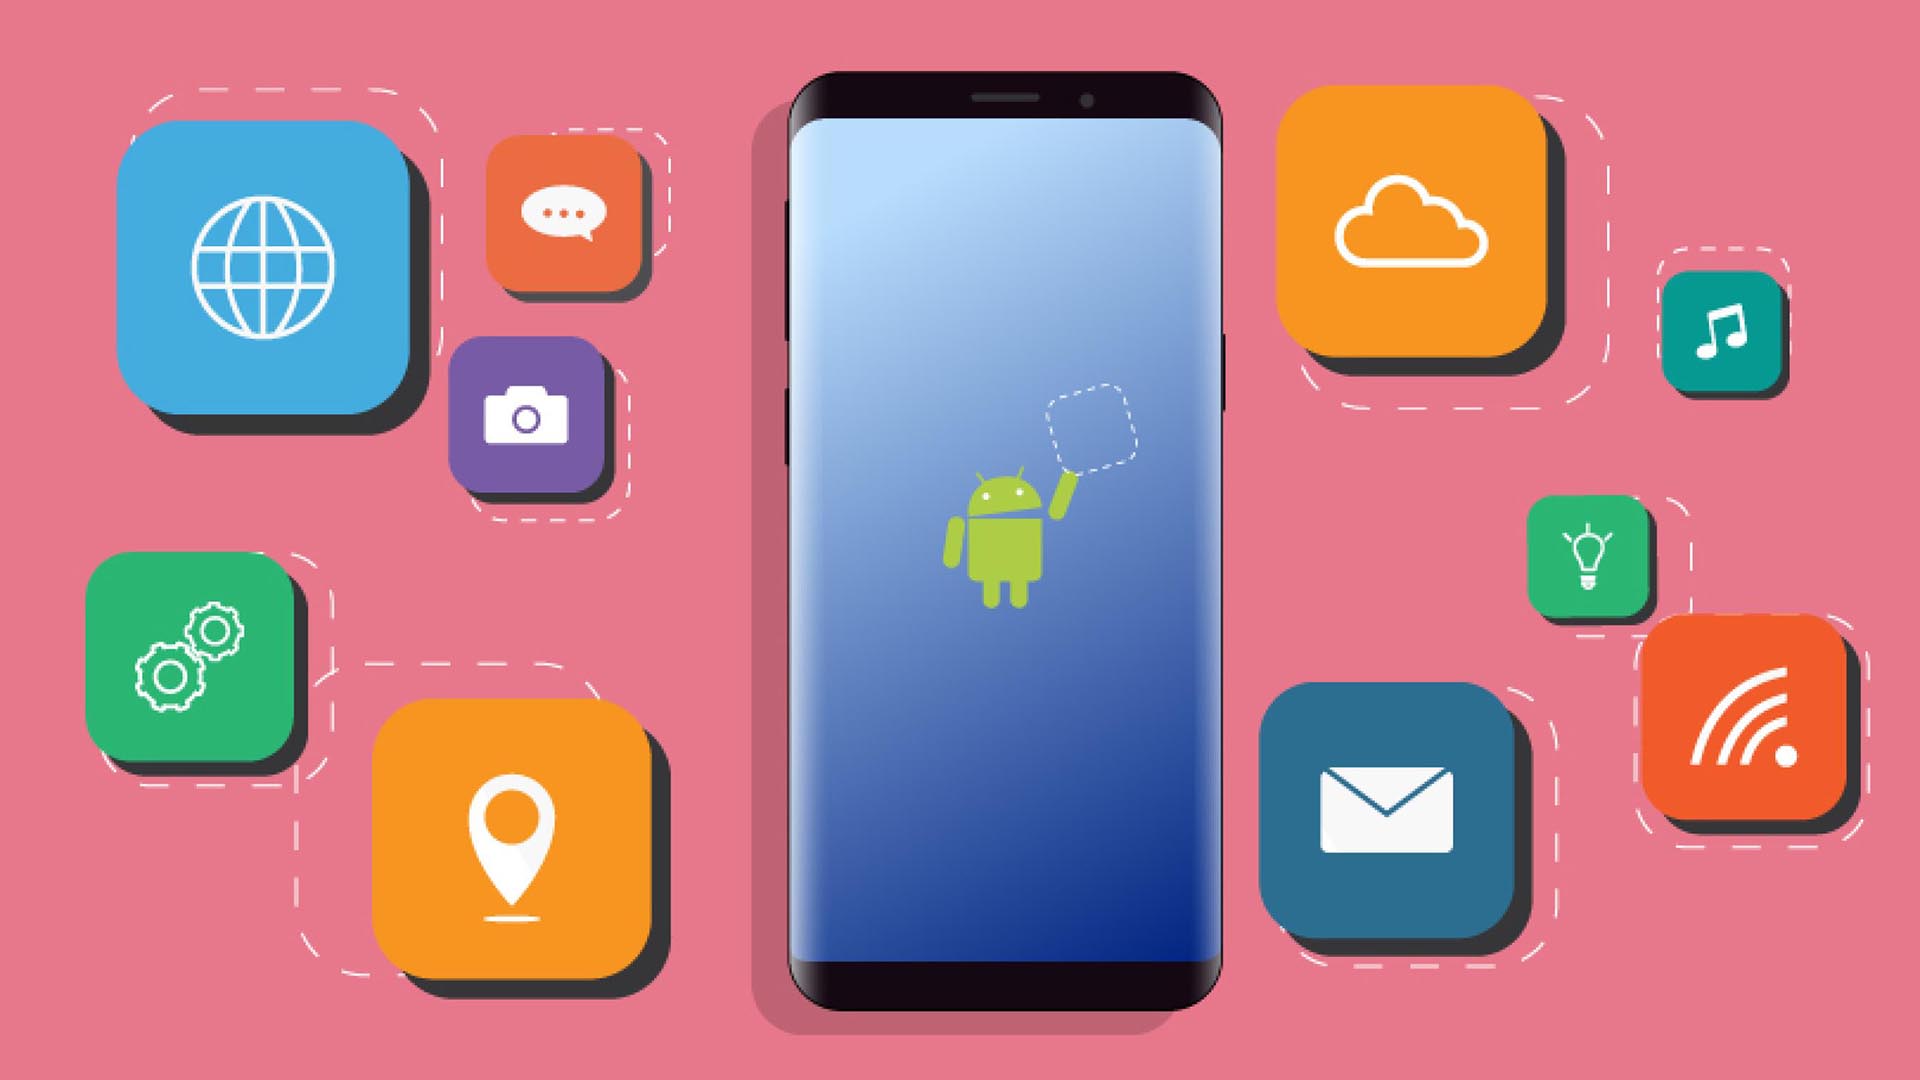 APK files: downloading, installing, and using on Android